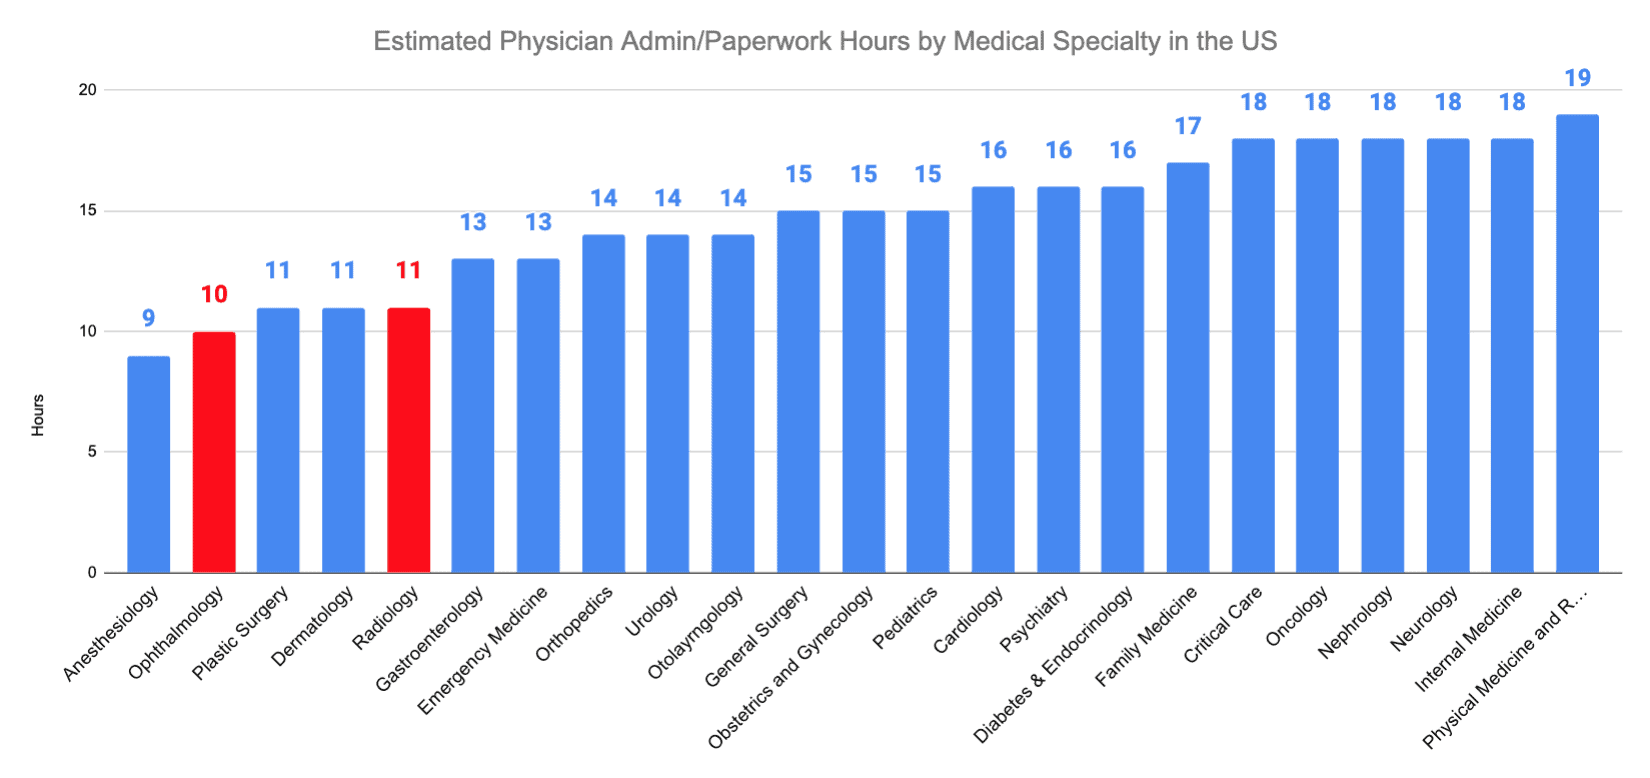 Radiology vs. Ophthalmology Estimated Physician Admin/Paperwork Hours by Medical Specialty in the US